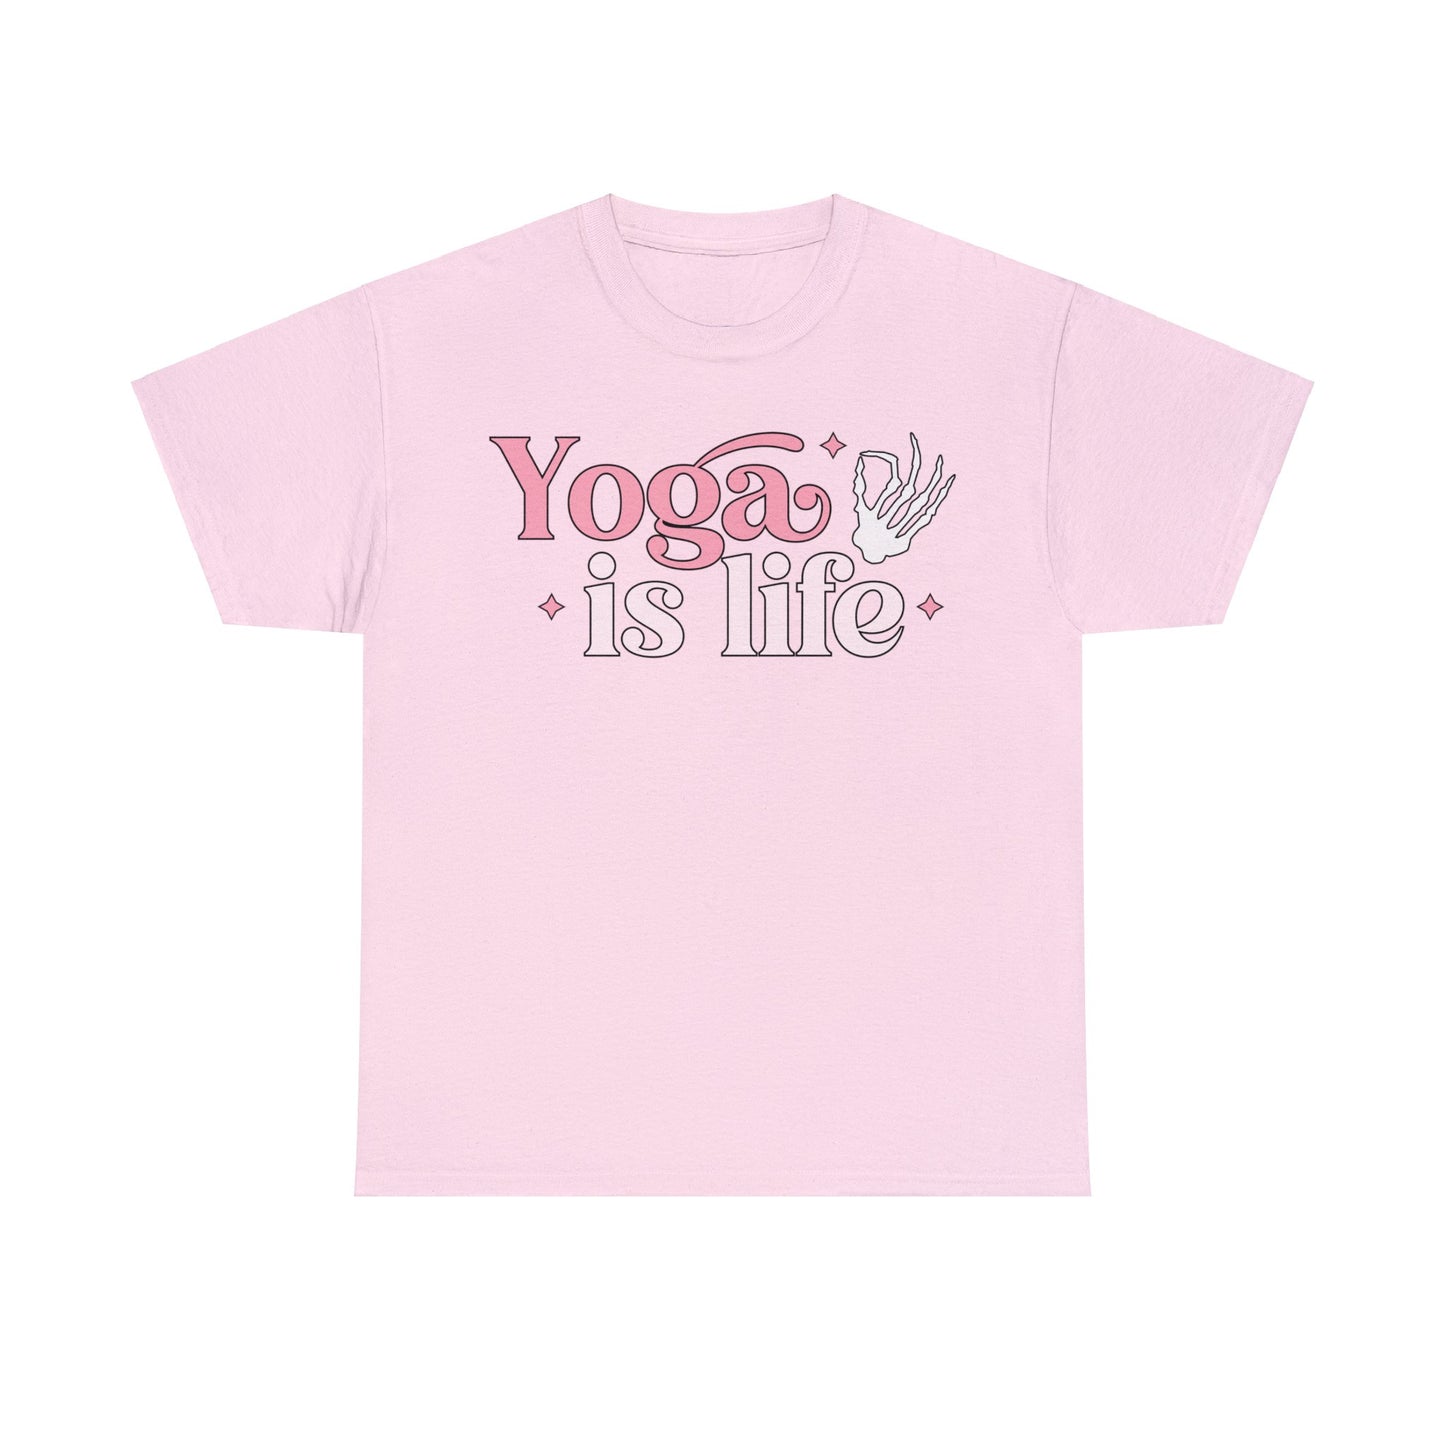 Yoga is Life T-Shirt - Elevate Your Style and Spirit! - Unisex Heavy Cotton Tee